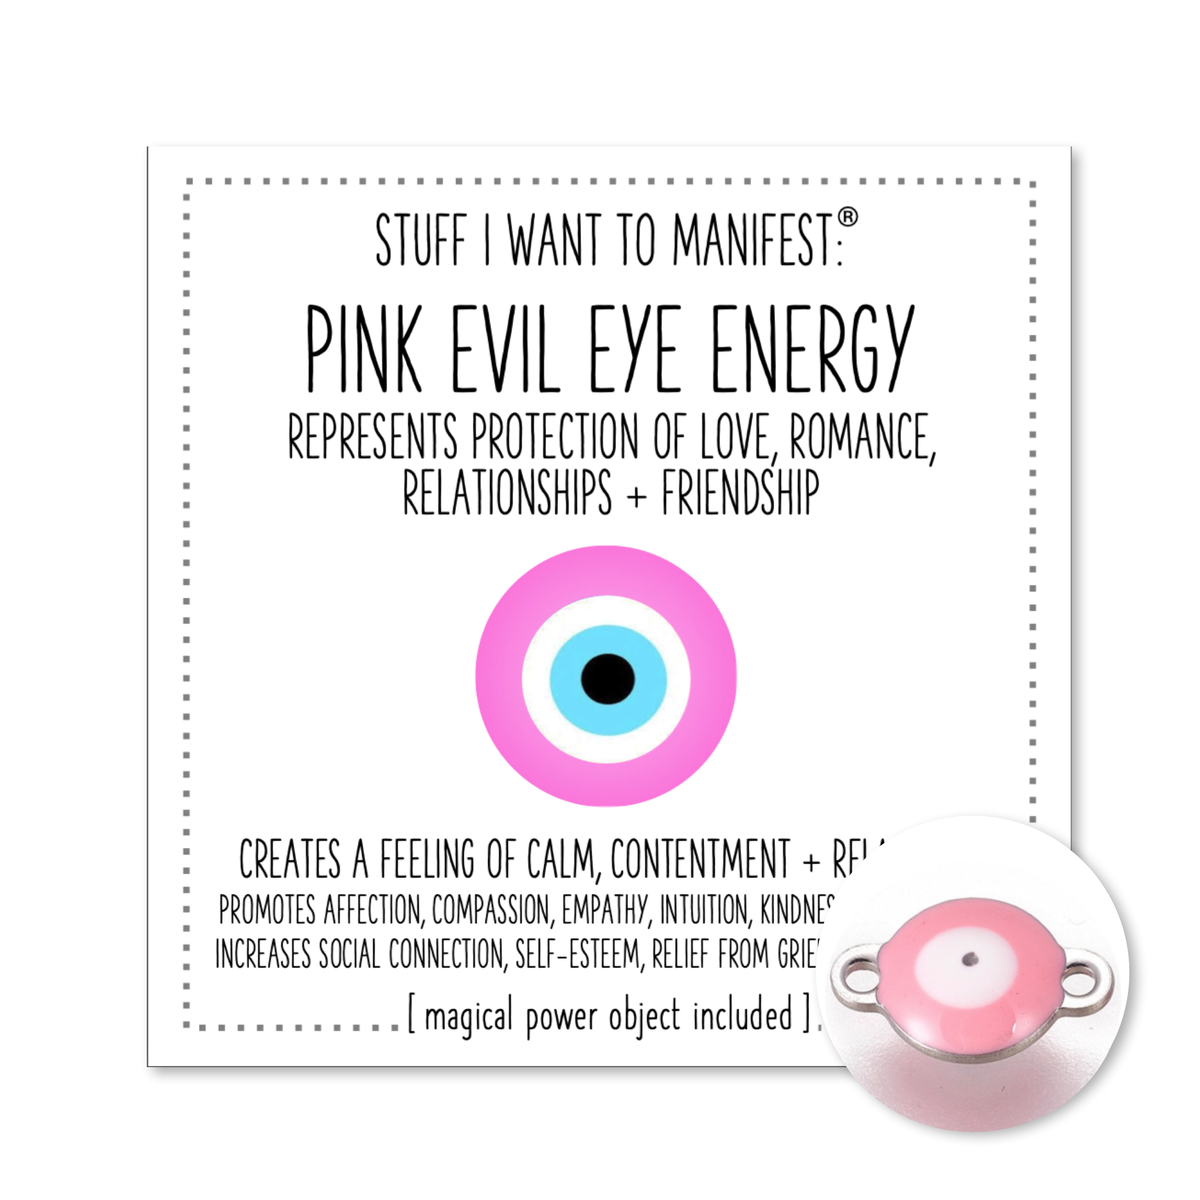 Stuff I Want To Manifest : The Energy of the PINK Evil Eye